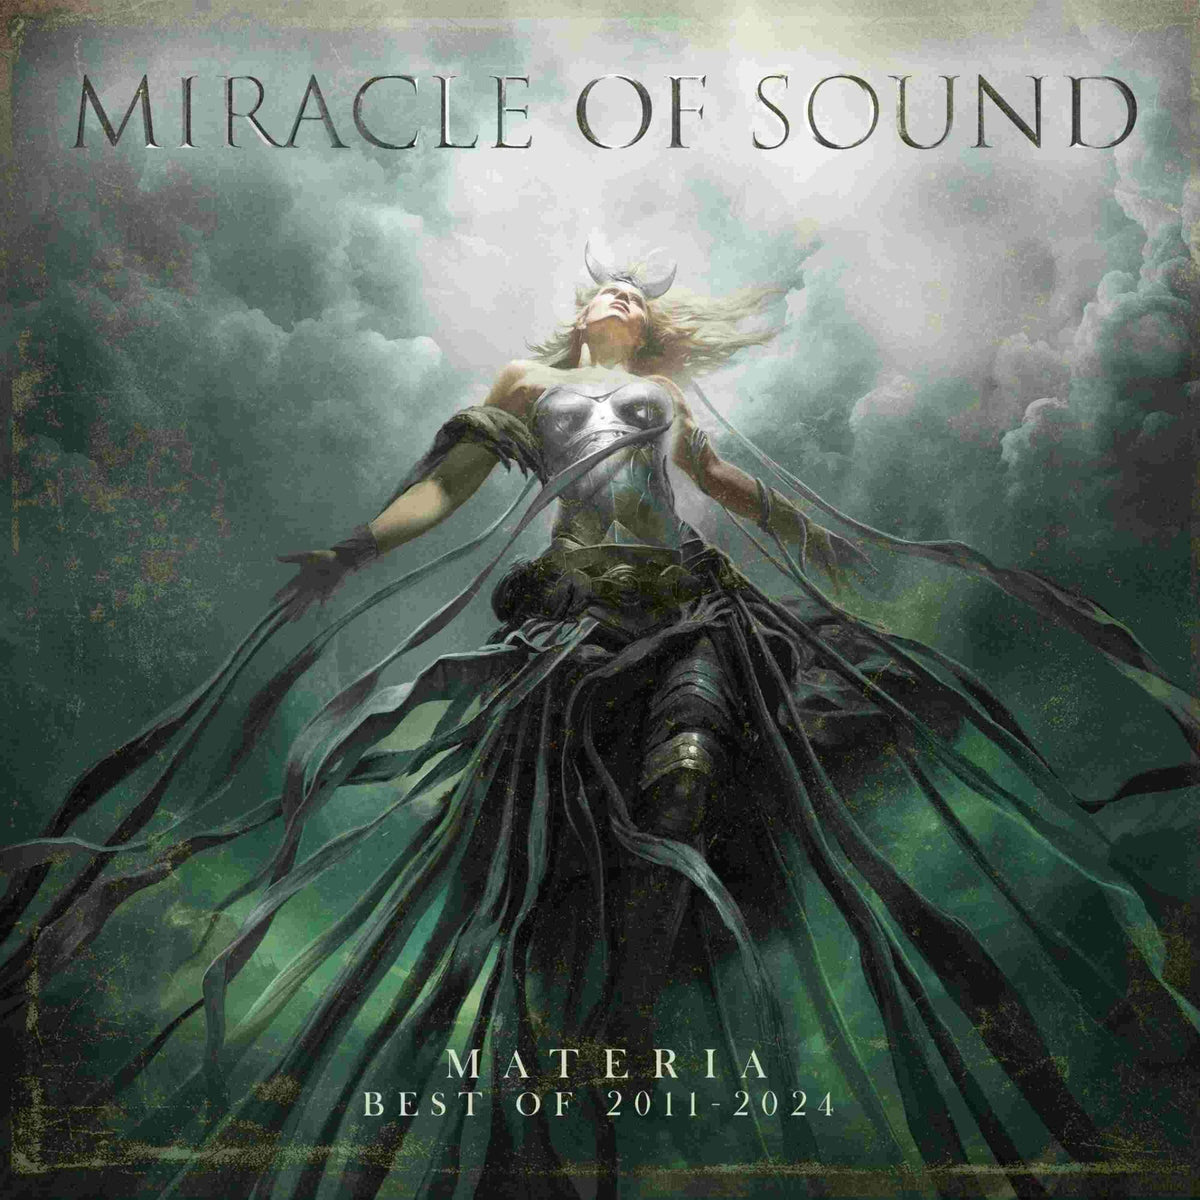 Miracle of Sound - Materia Best Of 2011 - 2024 - NPR1339VINYL